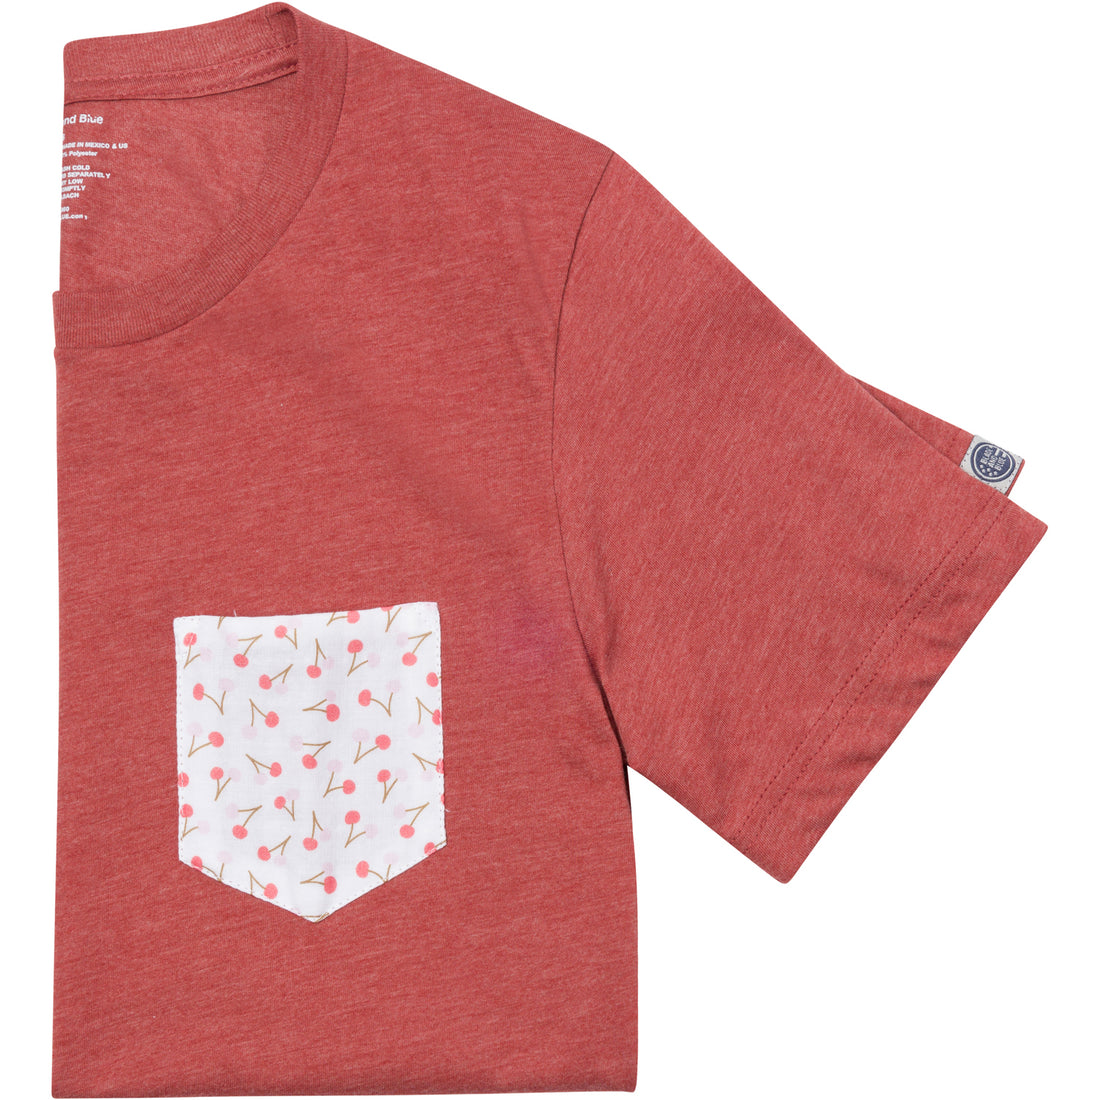 Clay Red Heather With Sweet Cherry Print Pocket Tee